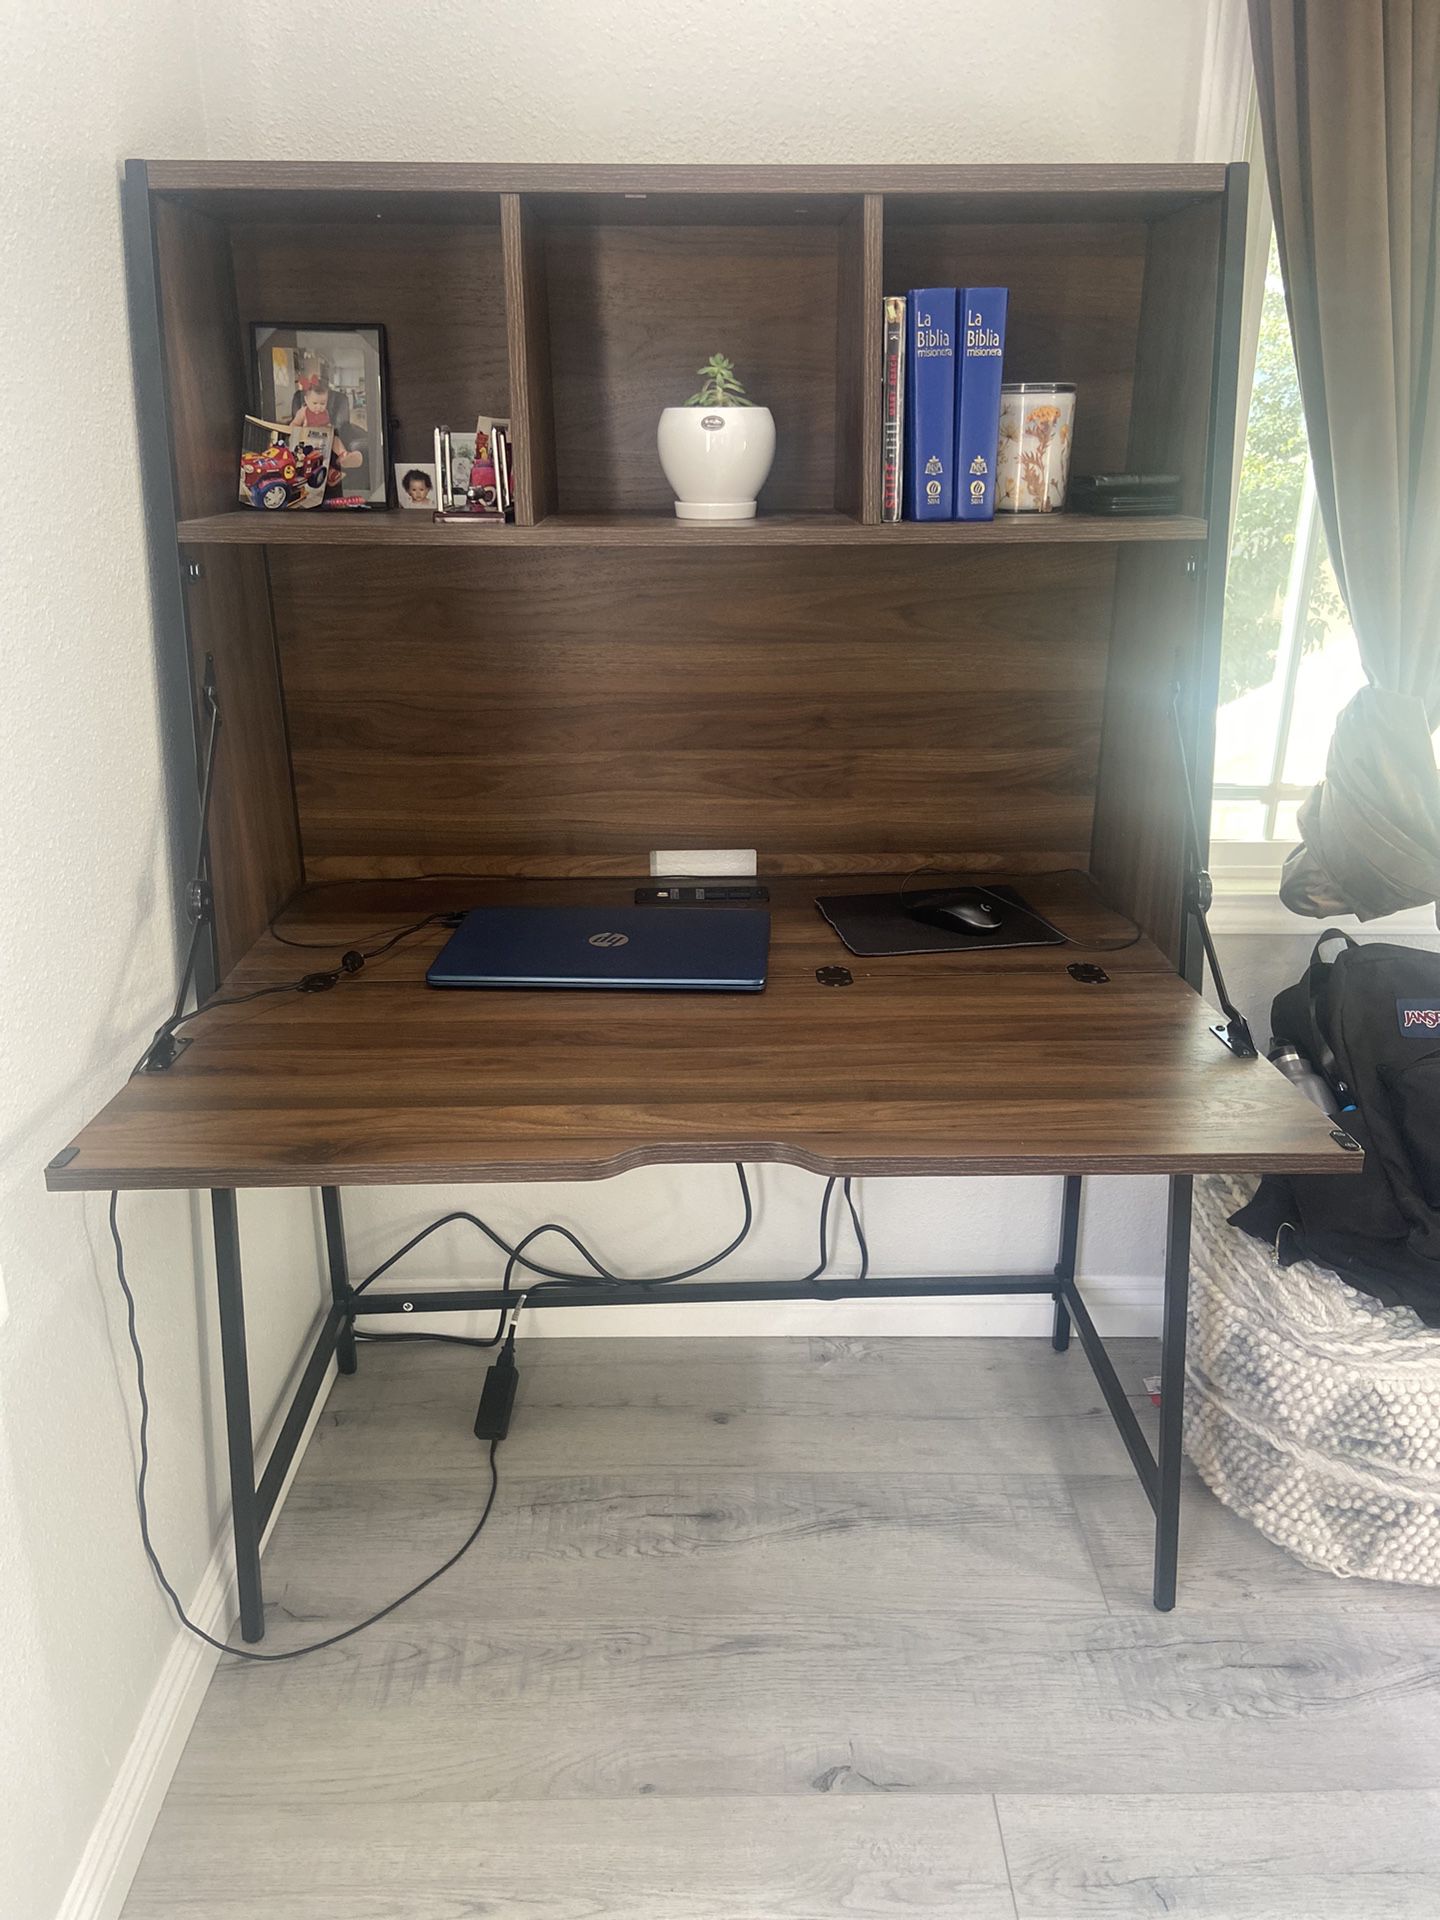 Loring Wood Secretary Desk with Hutch and Charging Station Walnut - Threshold